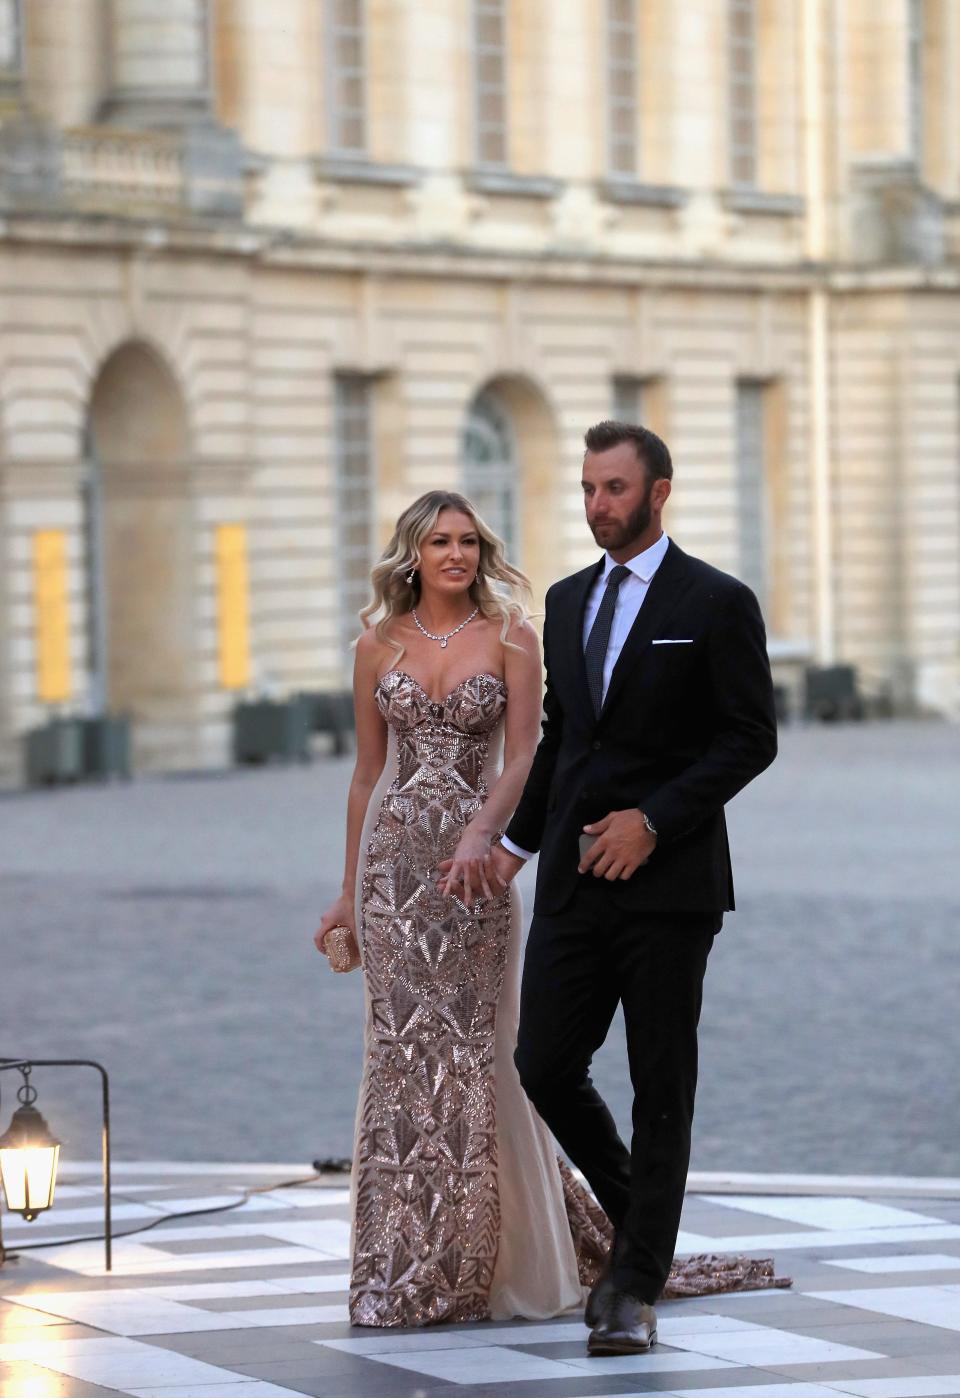 Dustin Johnson and Paulina Gretzky arrive at the Ryder Cup Gala dinner at the Palace of Versailles ahead of the 2018 Ryder Cup on September 26, 2018 in Versailles, France.